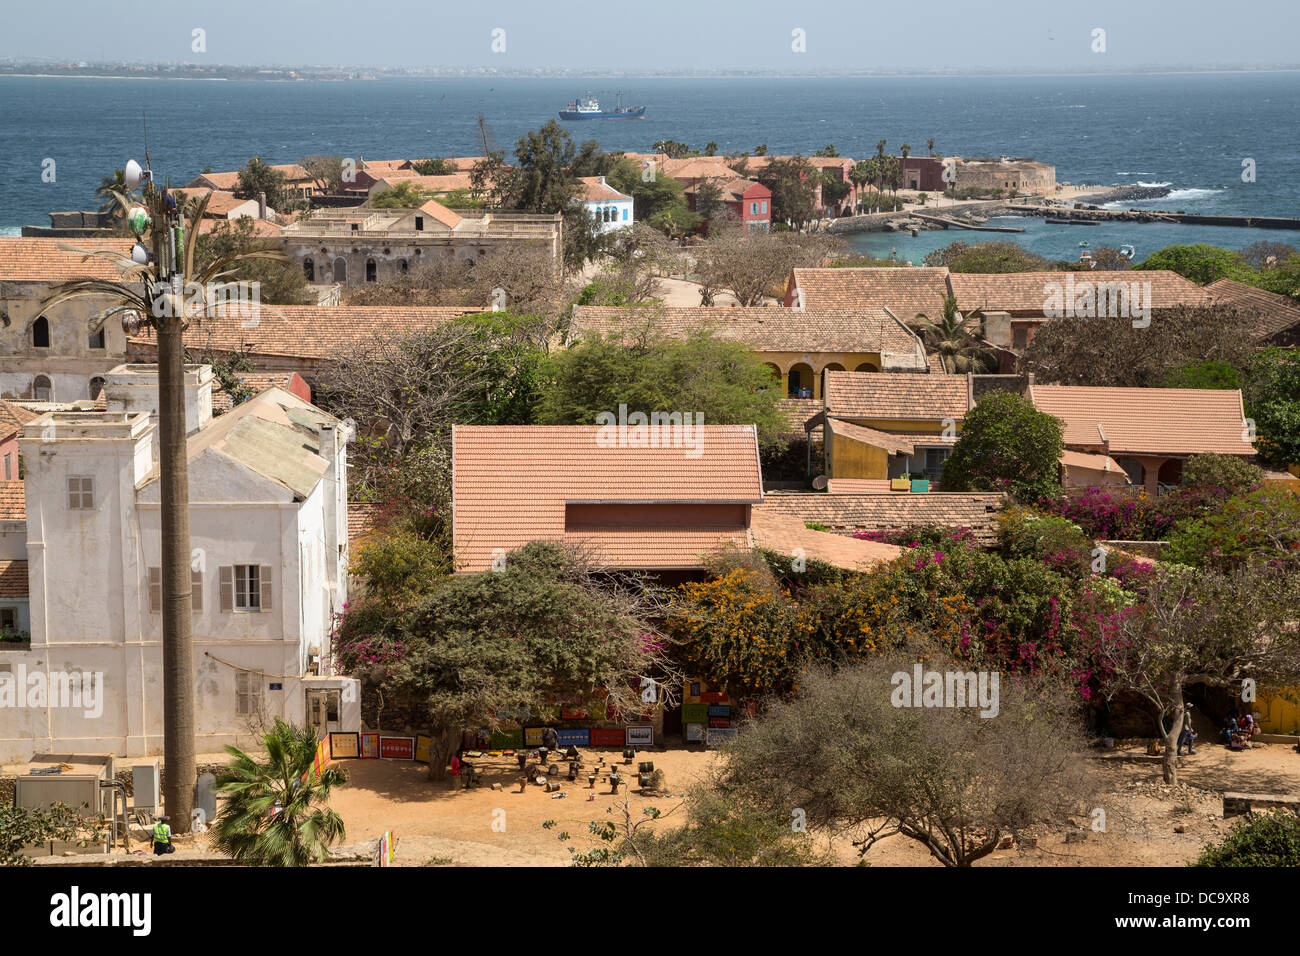 View of Goree Island, Senegal, from a Higher Point on the Island. Dakar in the distance. Stock Photo